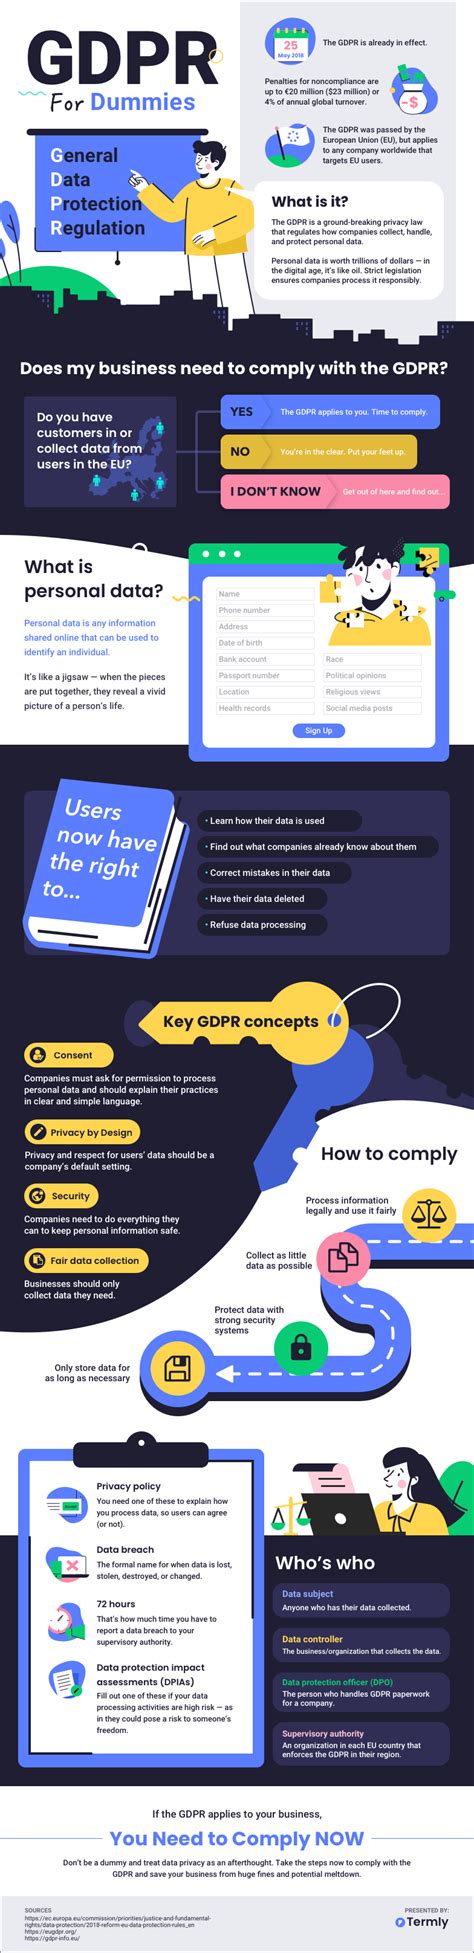 Dummies Guide To Gdpr Infographic Internet Big Data Technologies Infographic Educational